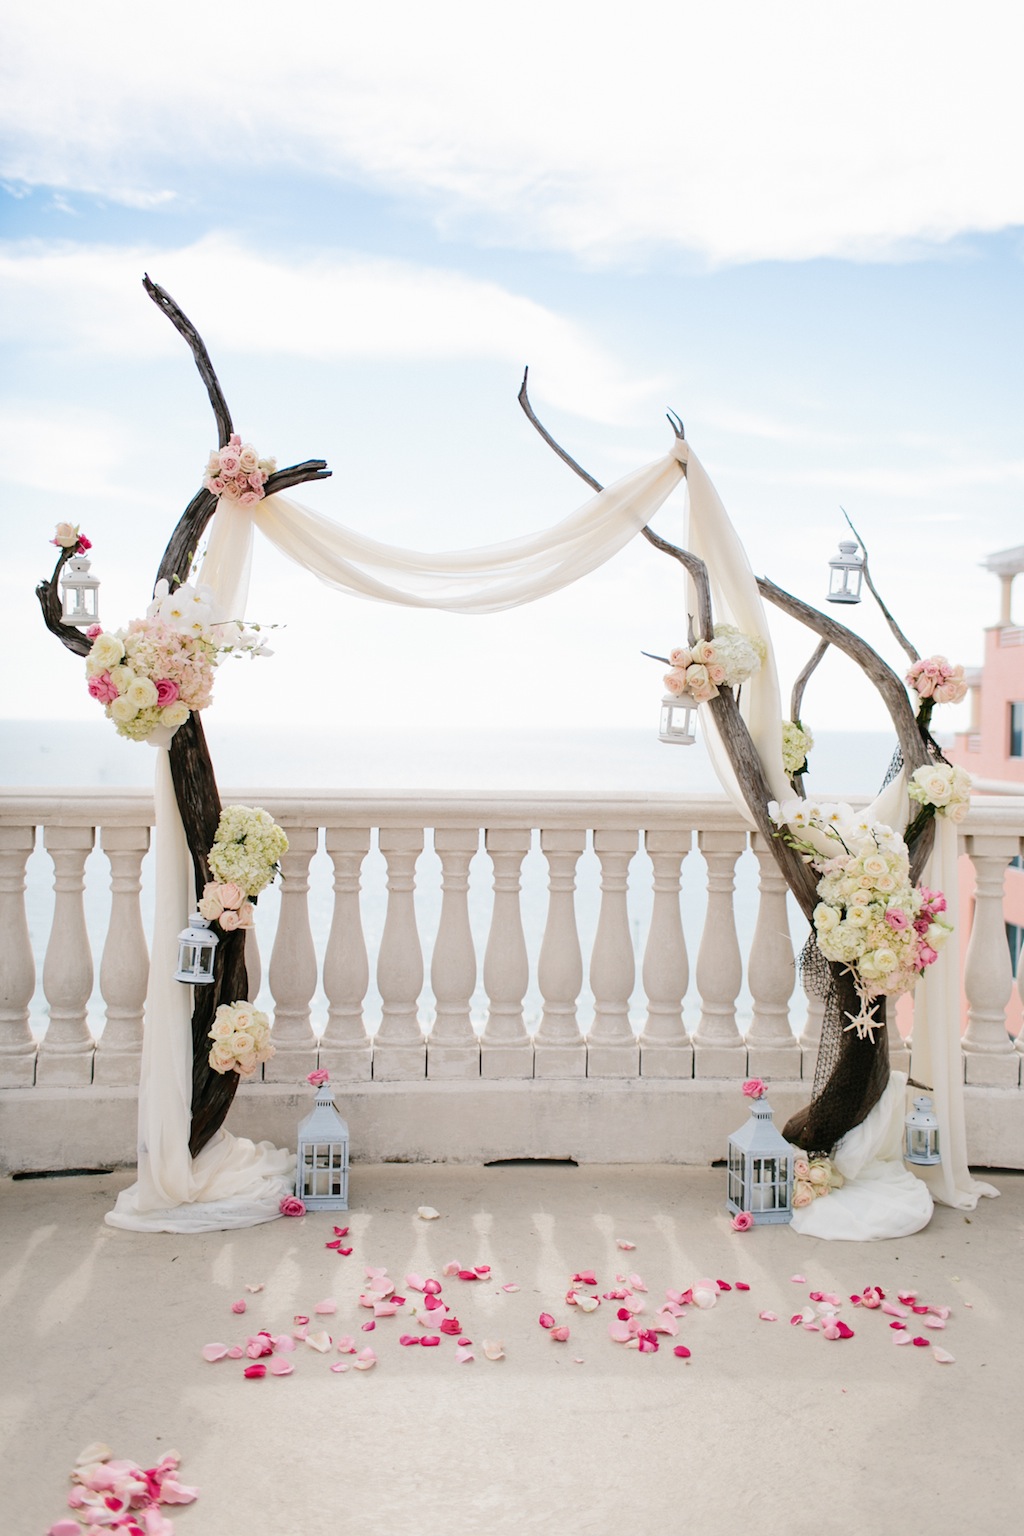 Destination Wedding in Clearwater Beach, FL Pink Flowers and Wood Arch Wedding Ceremony Decor